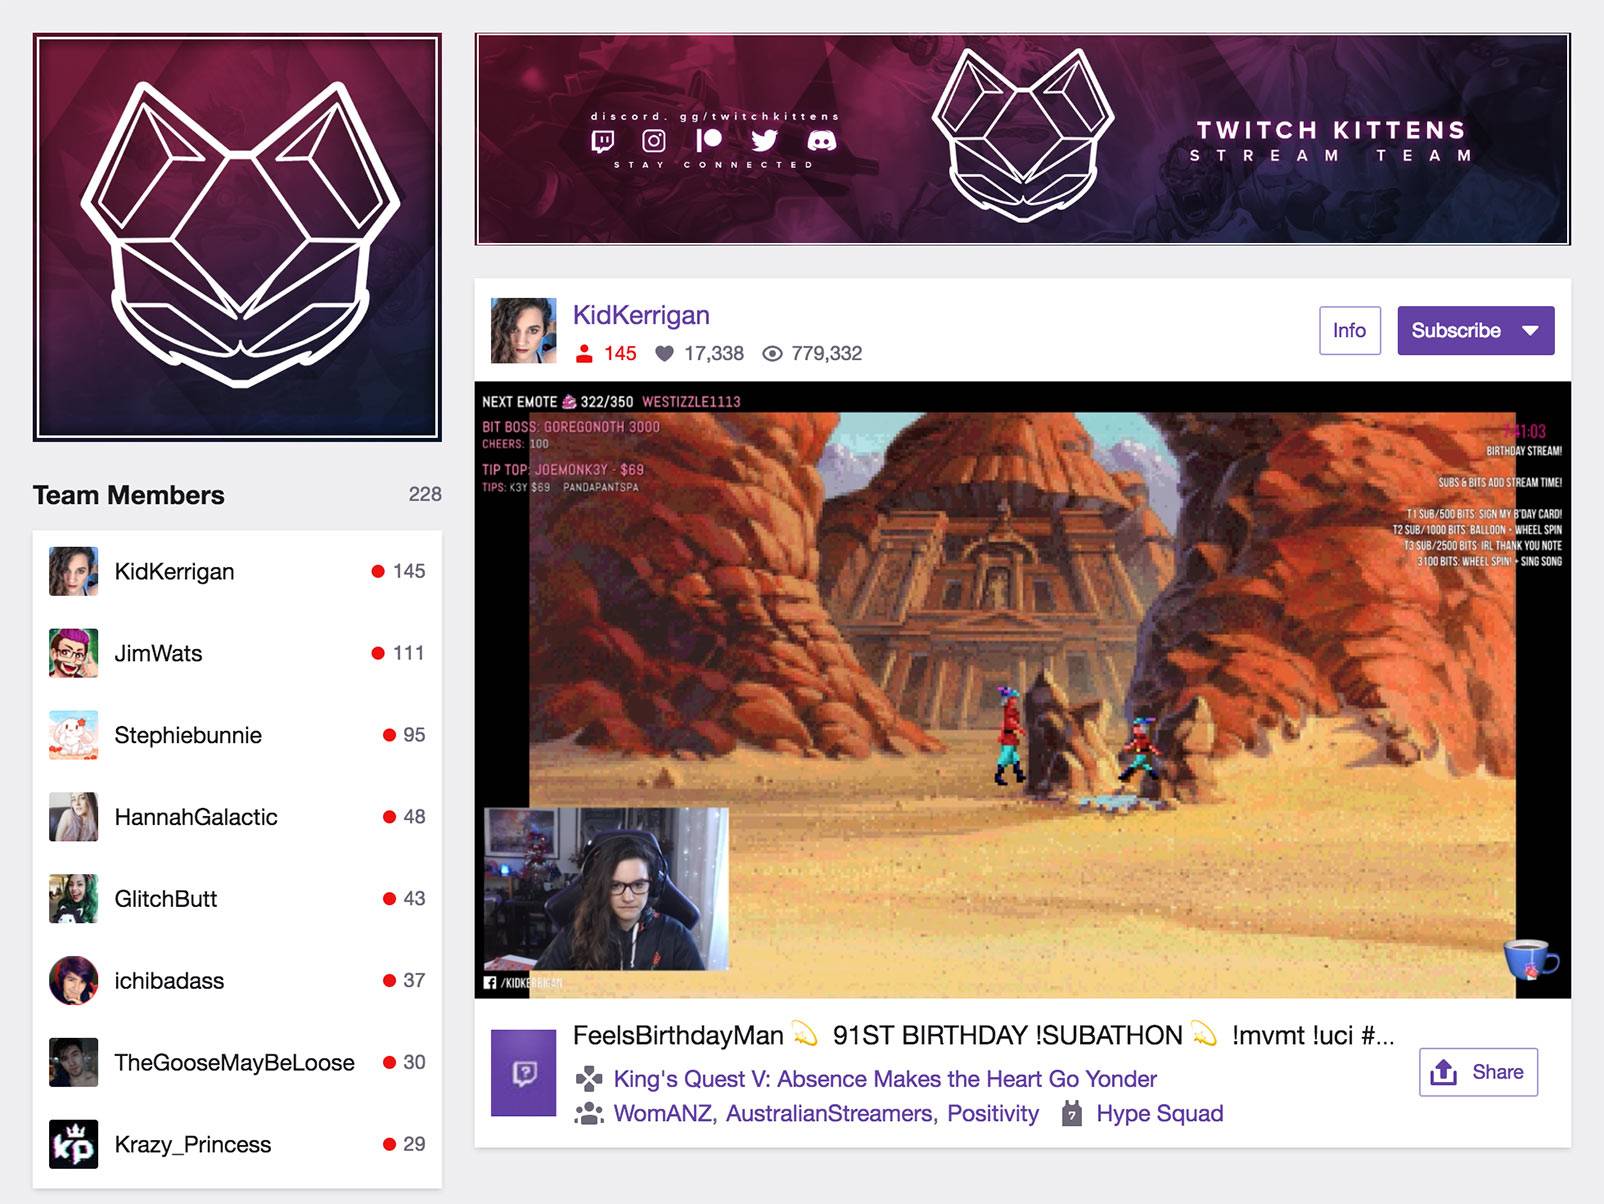 Team Members from Twitch Kittens featured on Twitch stream